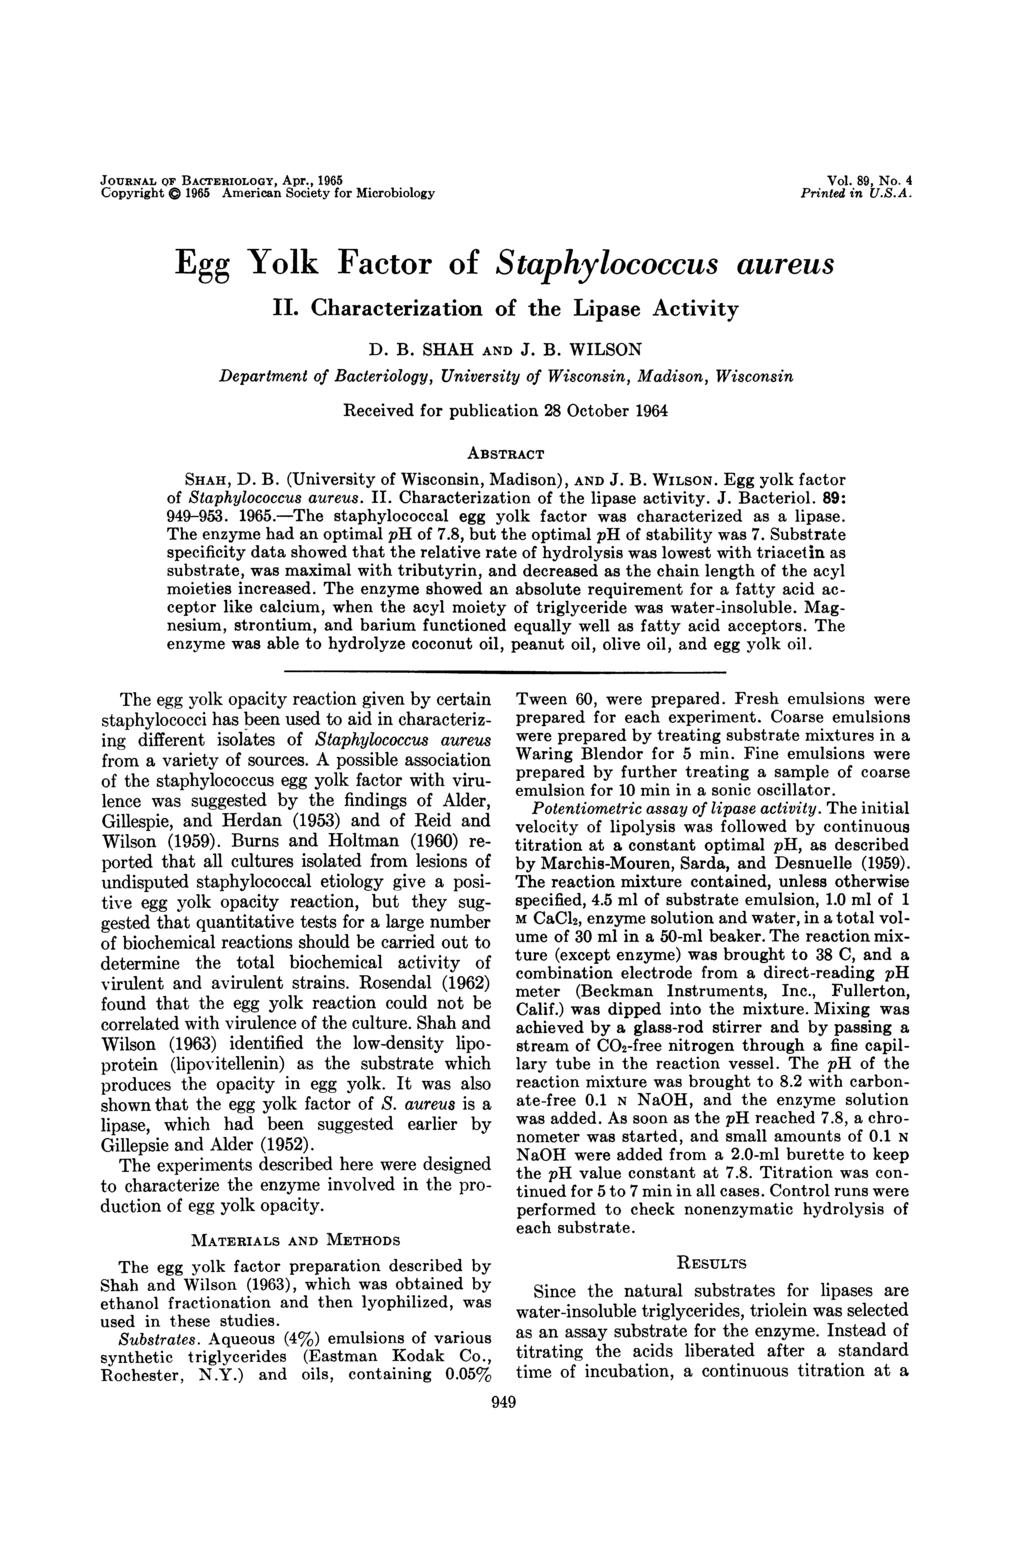 JOURNAL QF BACTERIOLOGY, Apr., 1965 Copyright 1965 American Society for Microbiology Vol. 89, No. 4 Printed in U.S.A. Egg Yolk Factor of Staphylococcus II.